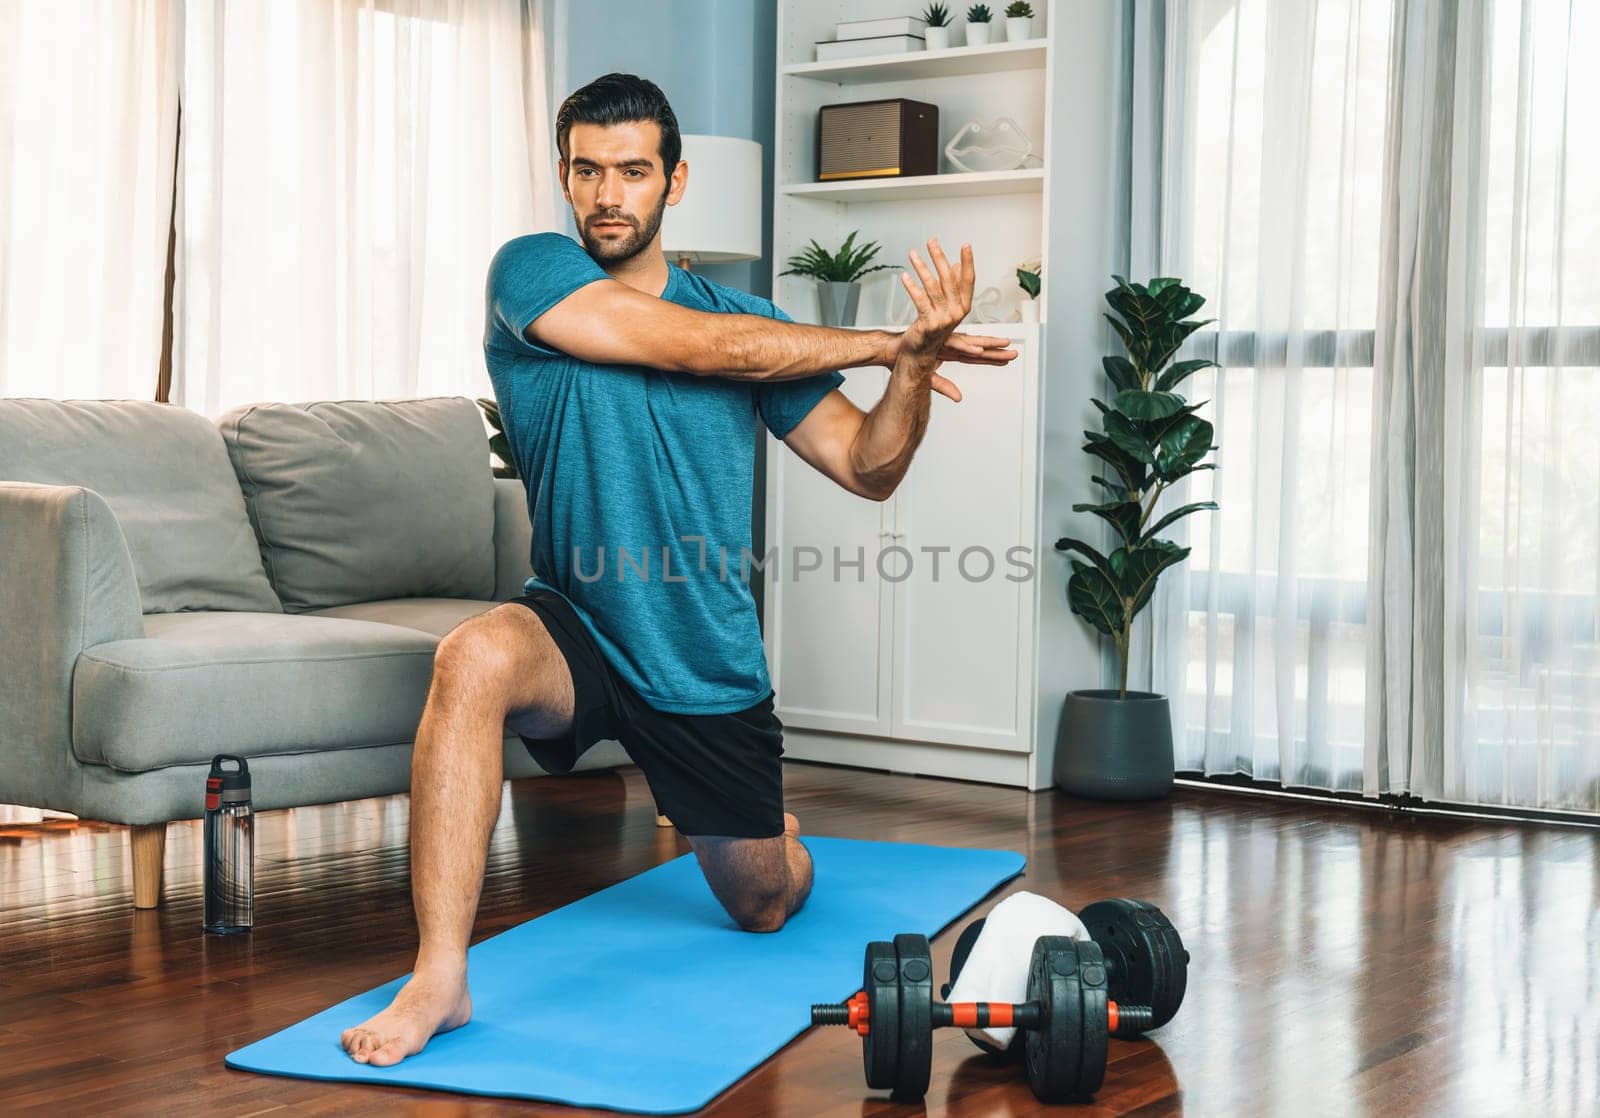 Athletic and sporty man doing warmup and stretching before home body workout exercise session for fit physique and healthy sport lifestyle at home. Gaiety home exercise workout training concept.